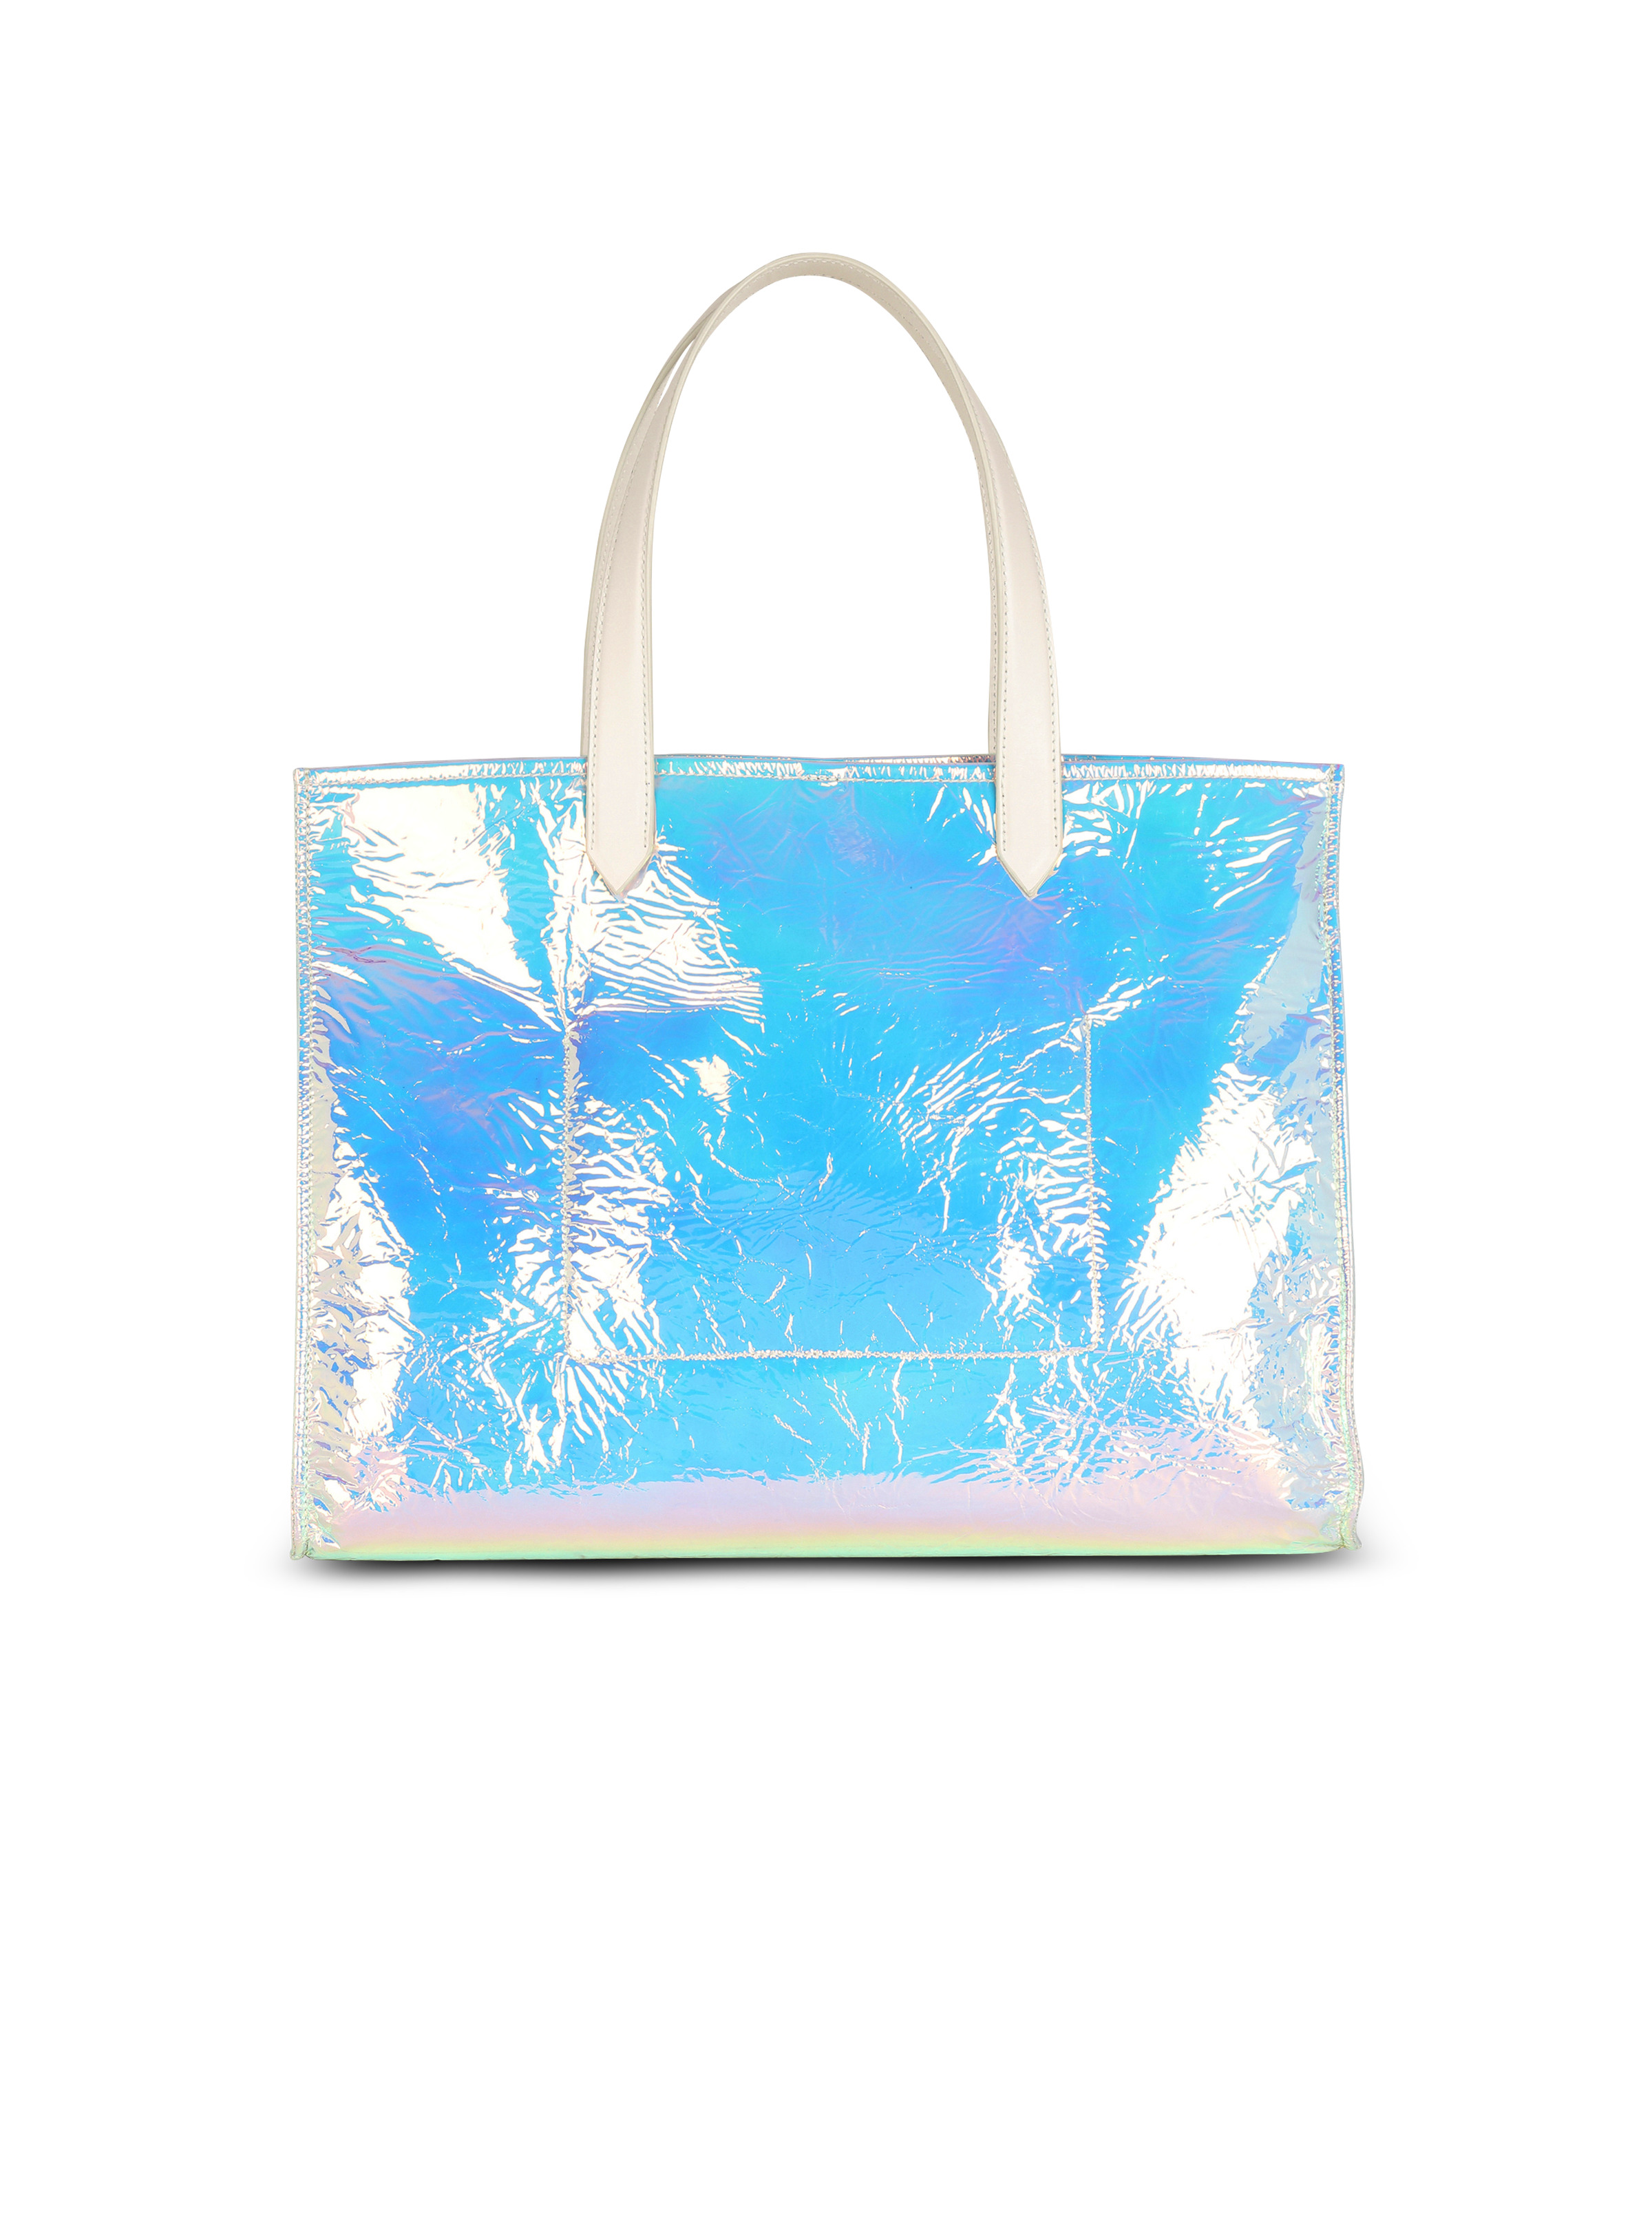 B-Army iridescent leather shopping bag - 4